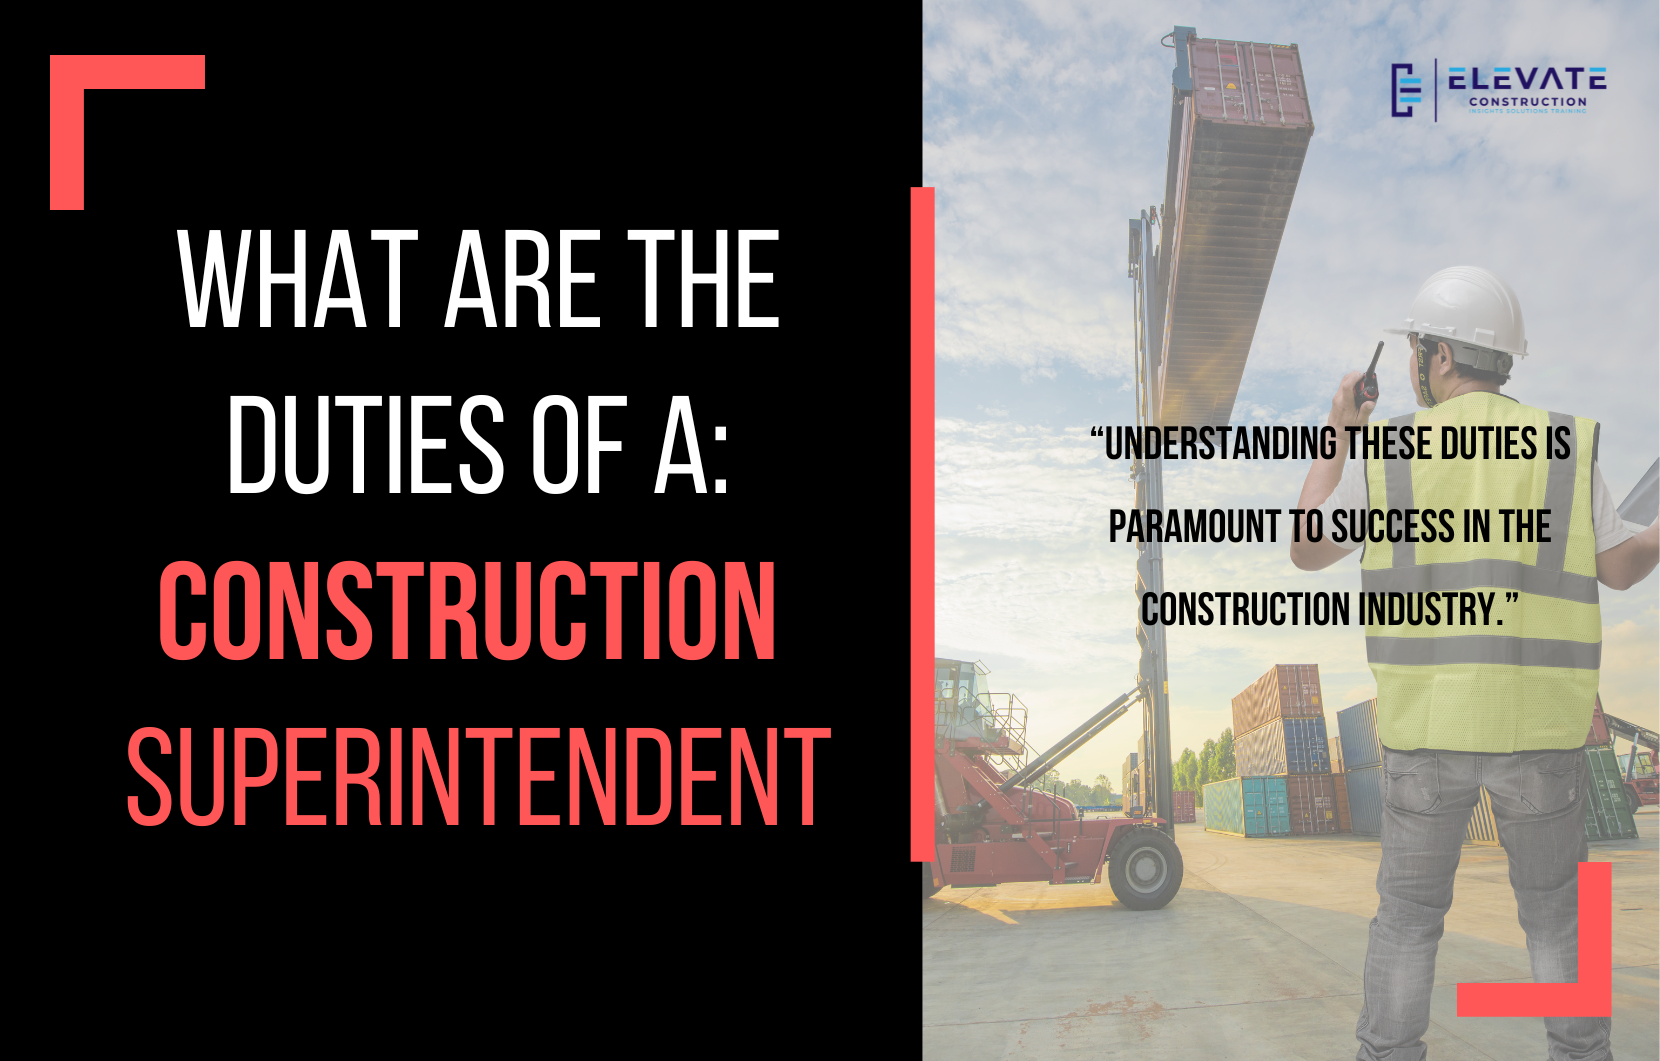 What Are The Duties Of A Construction Superintendent?